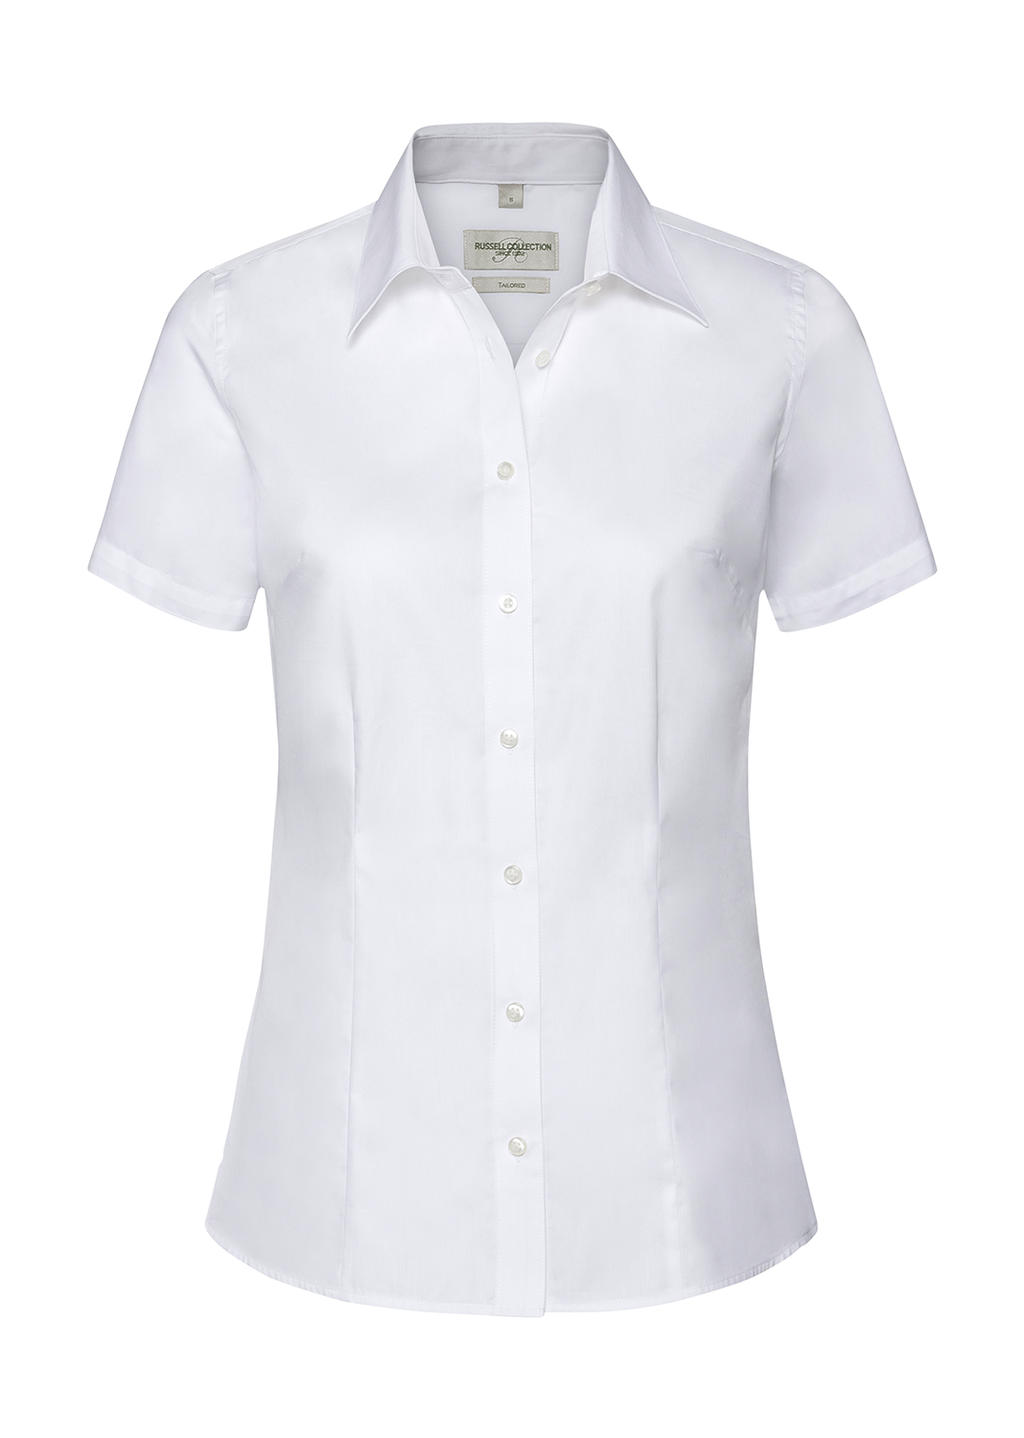  Ladies Tailored Coolmax? Shirt in Farbe White